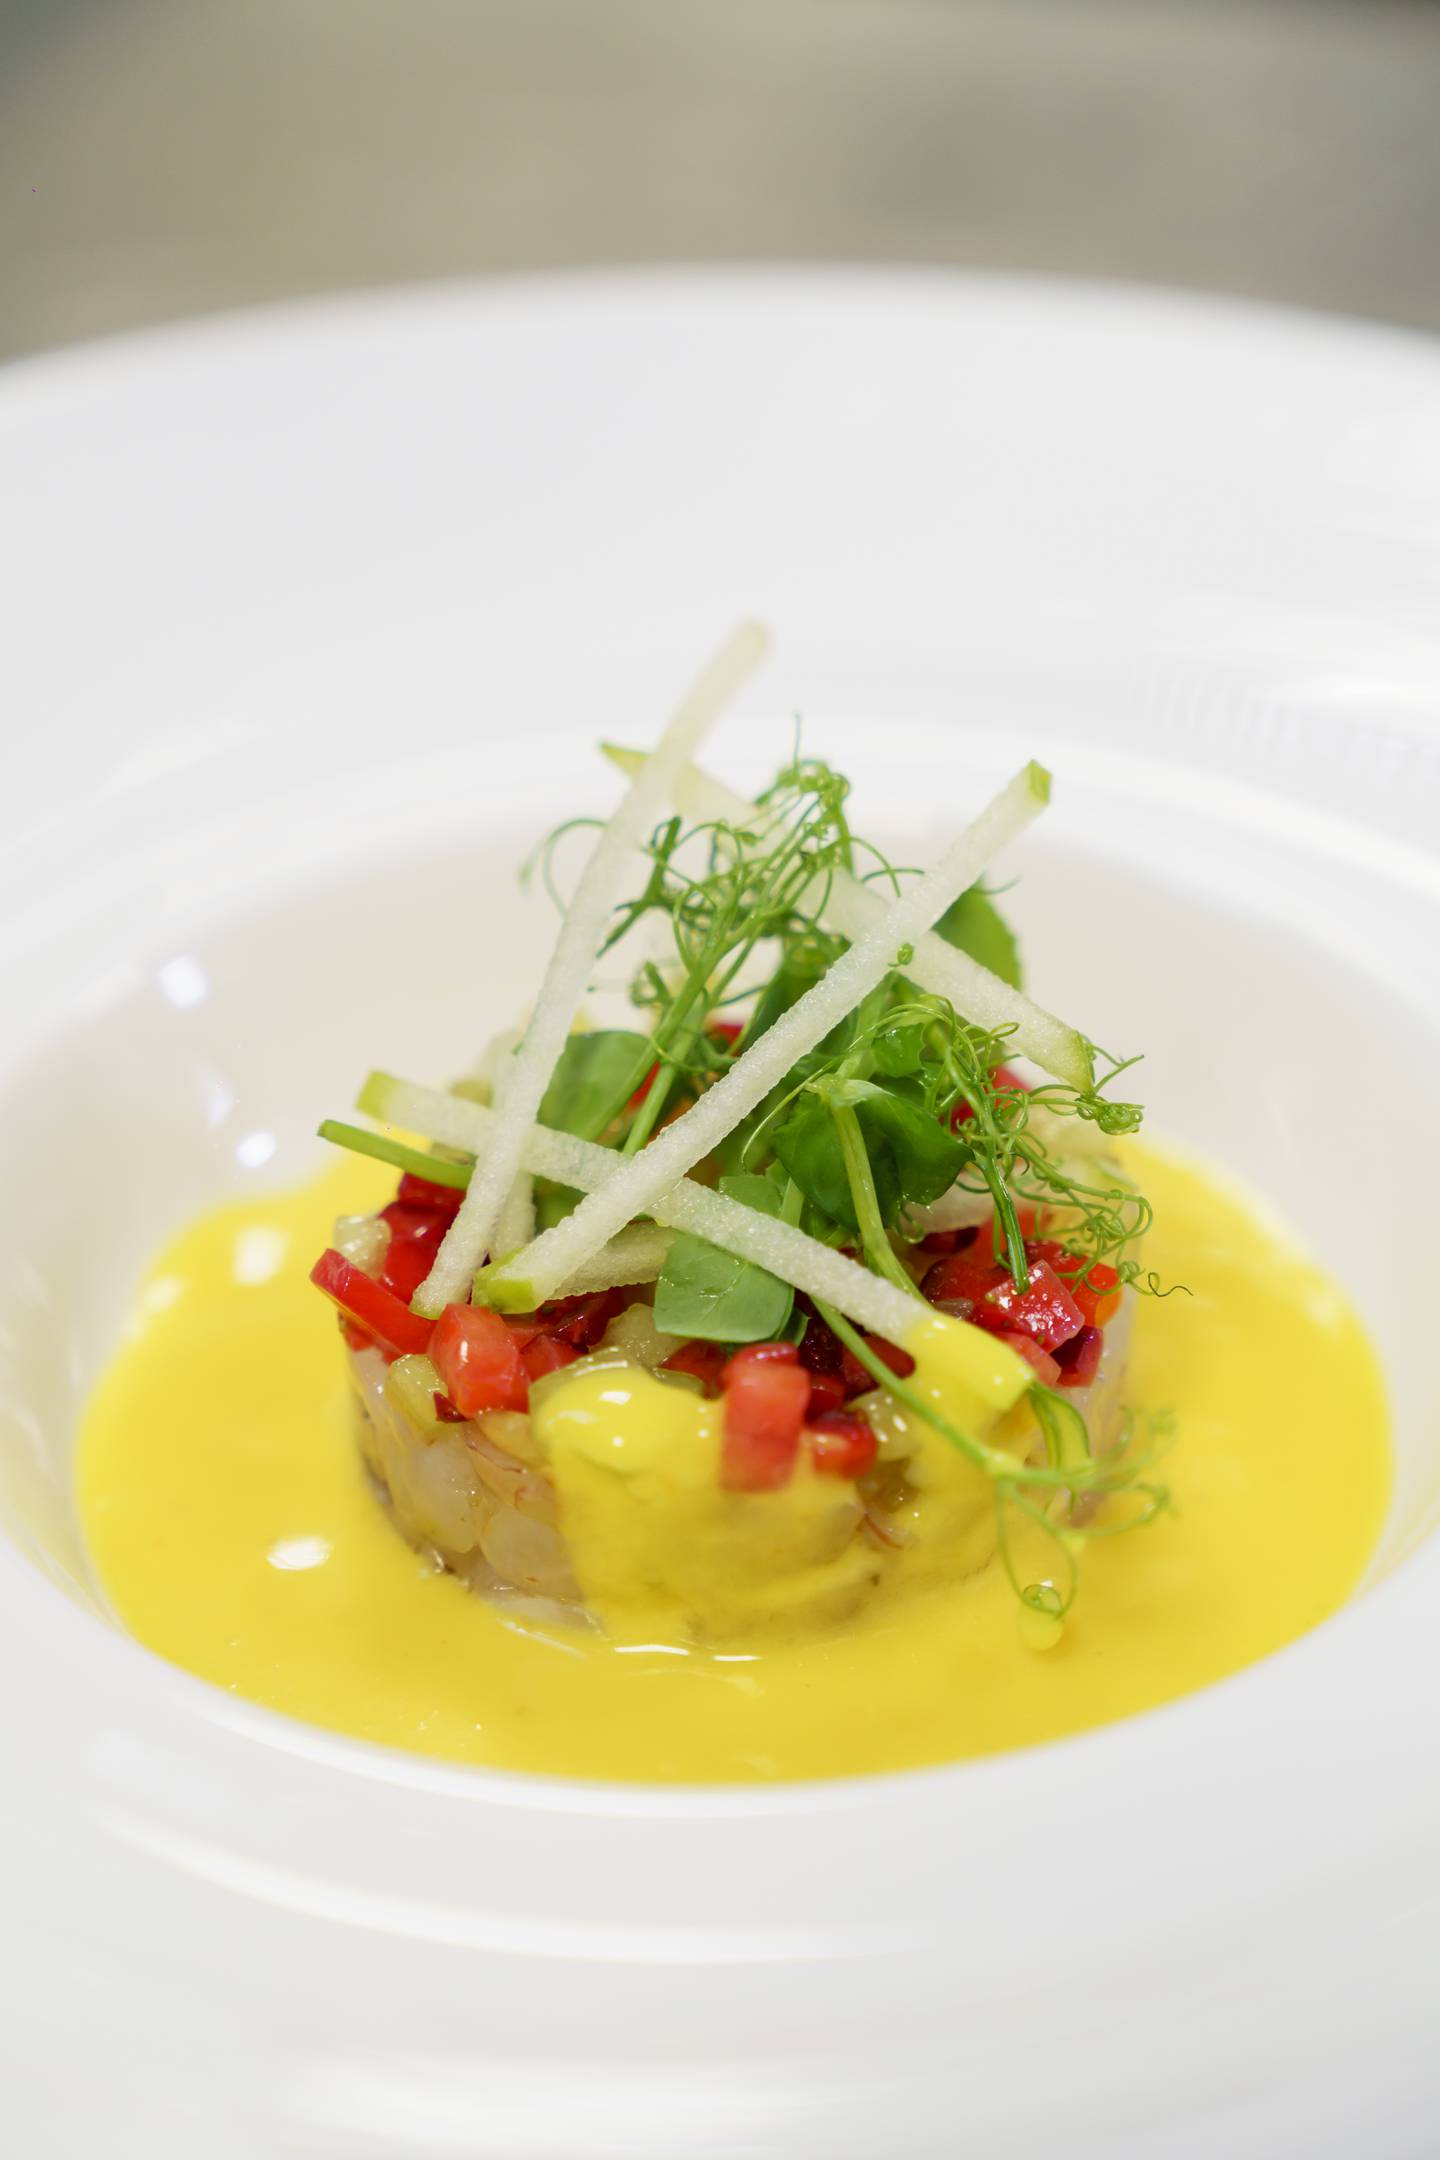 The tartare dish, made with sea bass, red prawns and a yellow cherry tomato coulis. Photo: Mandarin Oriental Emirates Palace